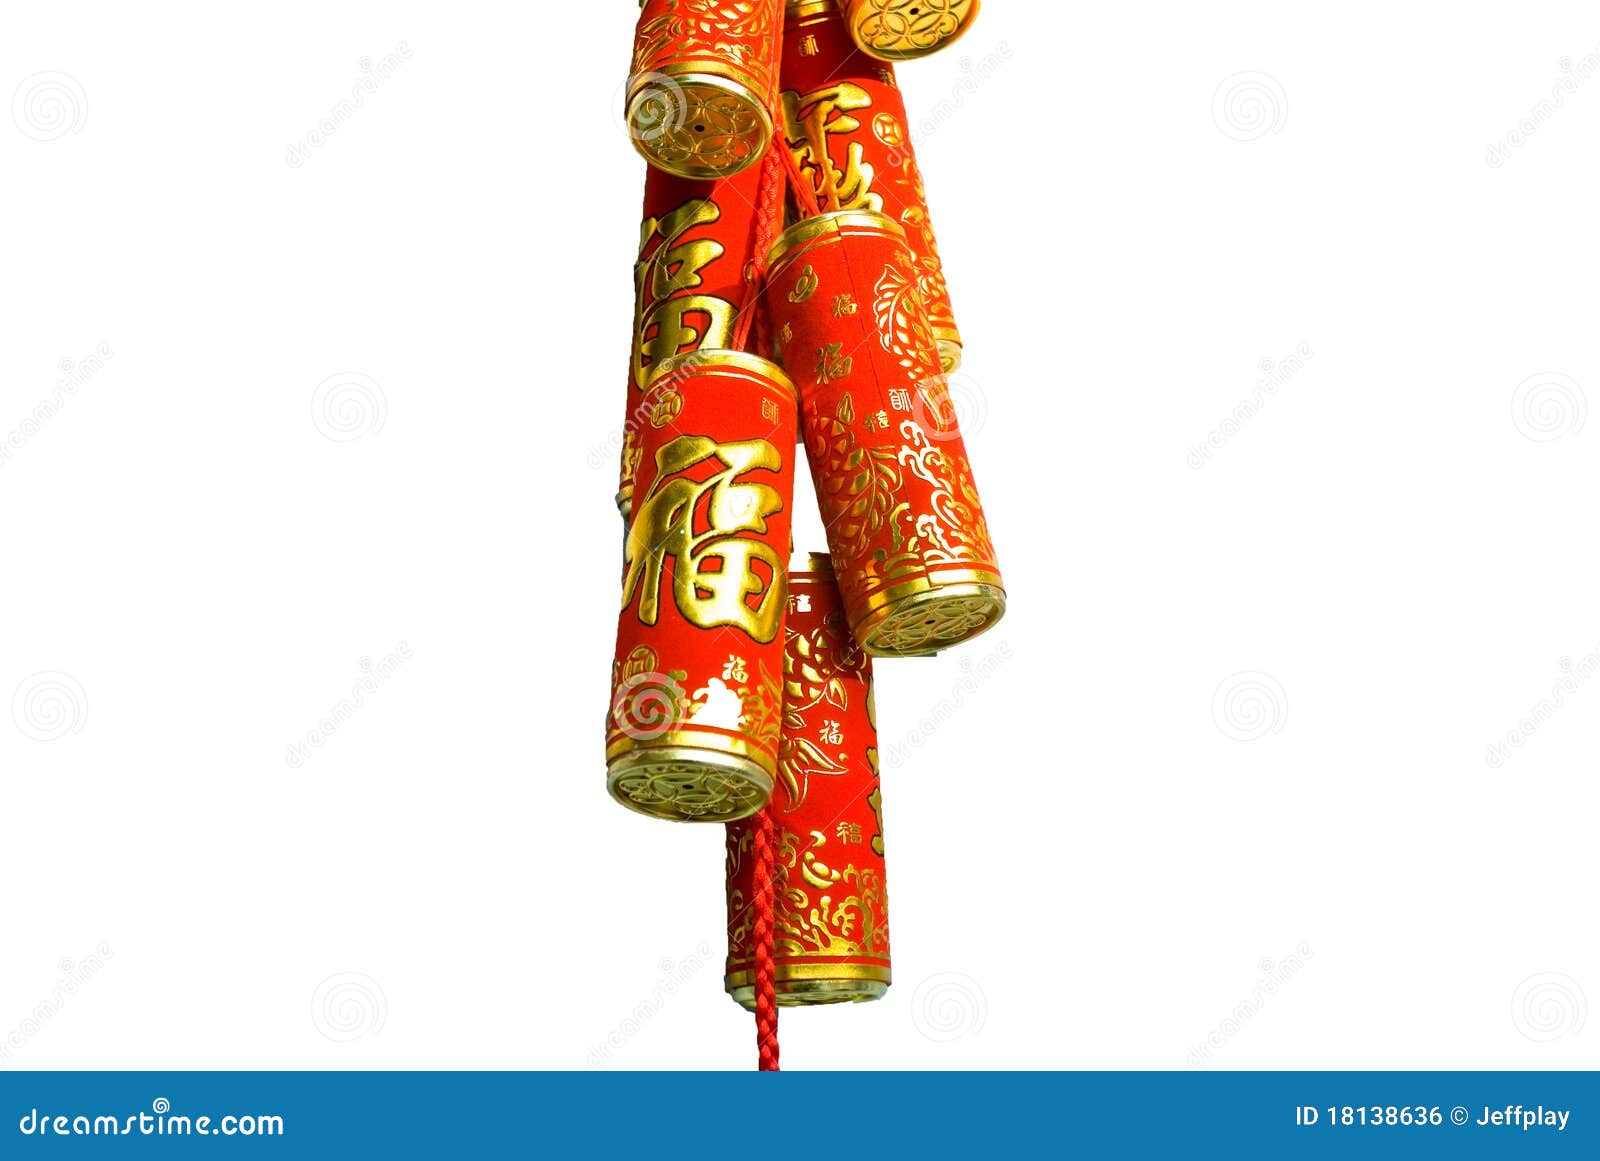 Firecracker Of The Chinese New Year Royalty Free Stock Image - Image: 18138636